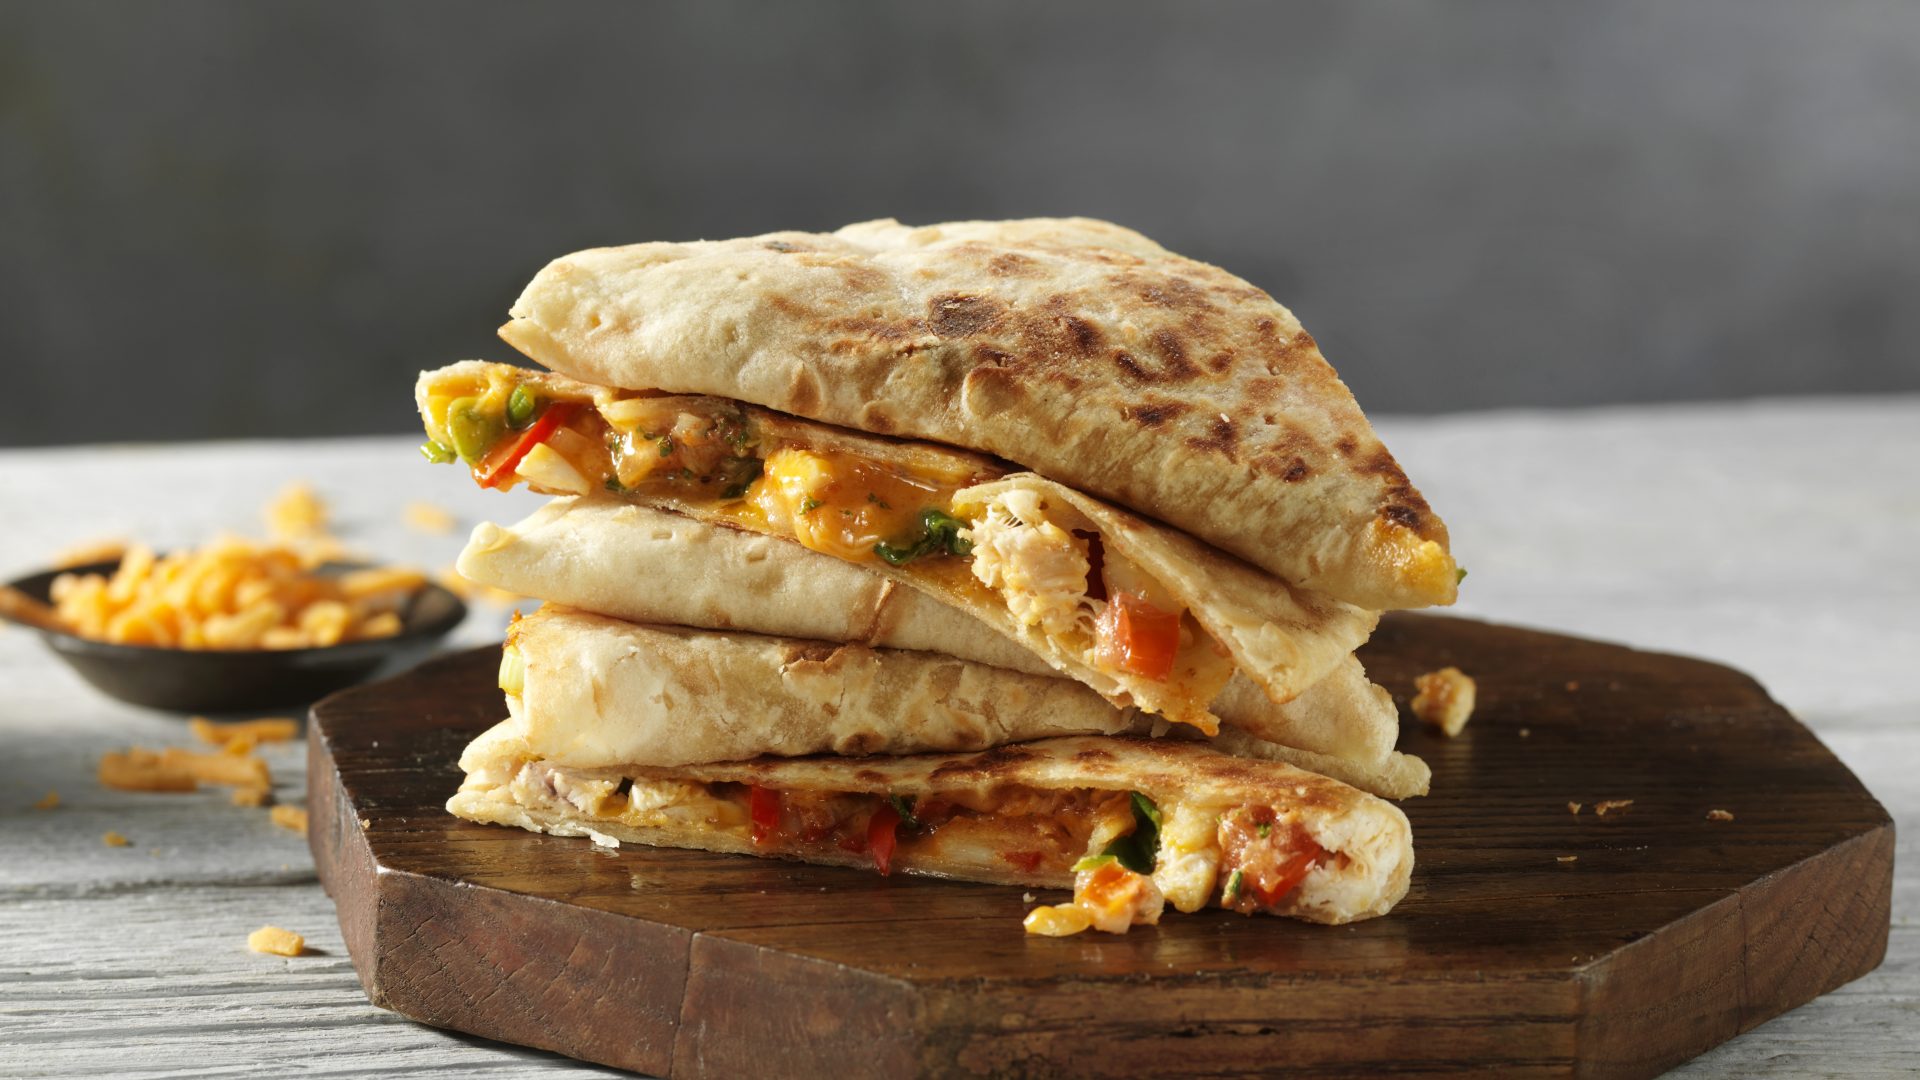 Breakfast Quesadilla stuffed with fried egg, chicken, cheese, tomatoes and chives using Stonefire Piadina.